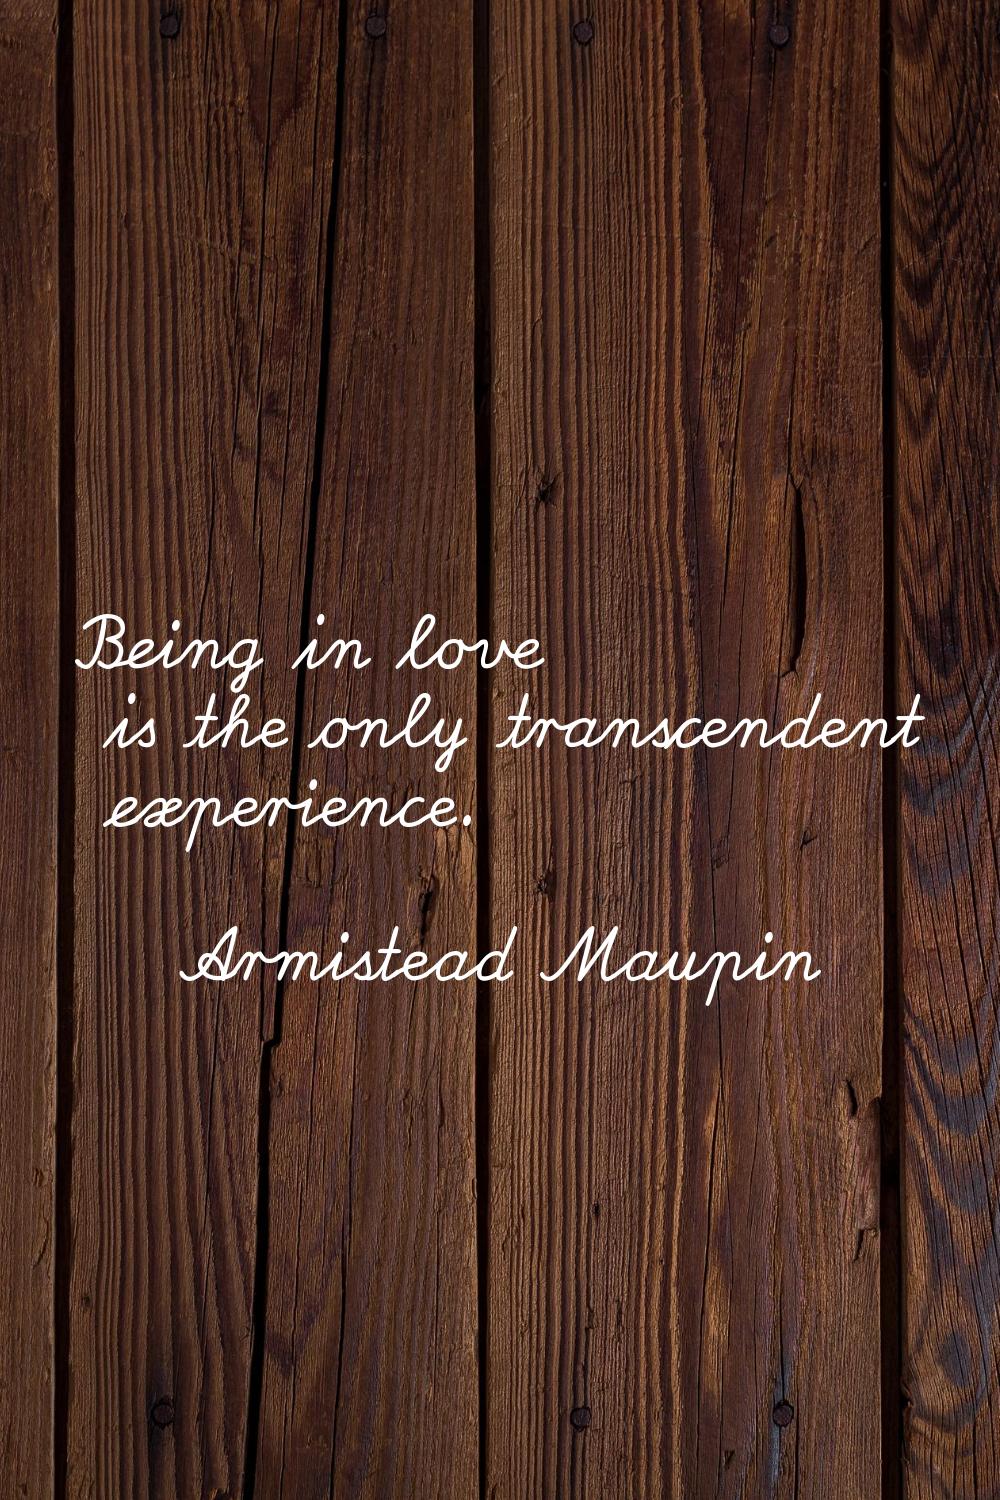 Being in love is the only transcendent experience.